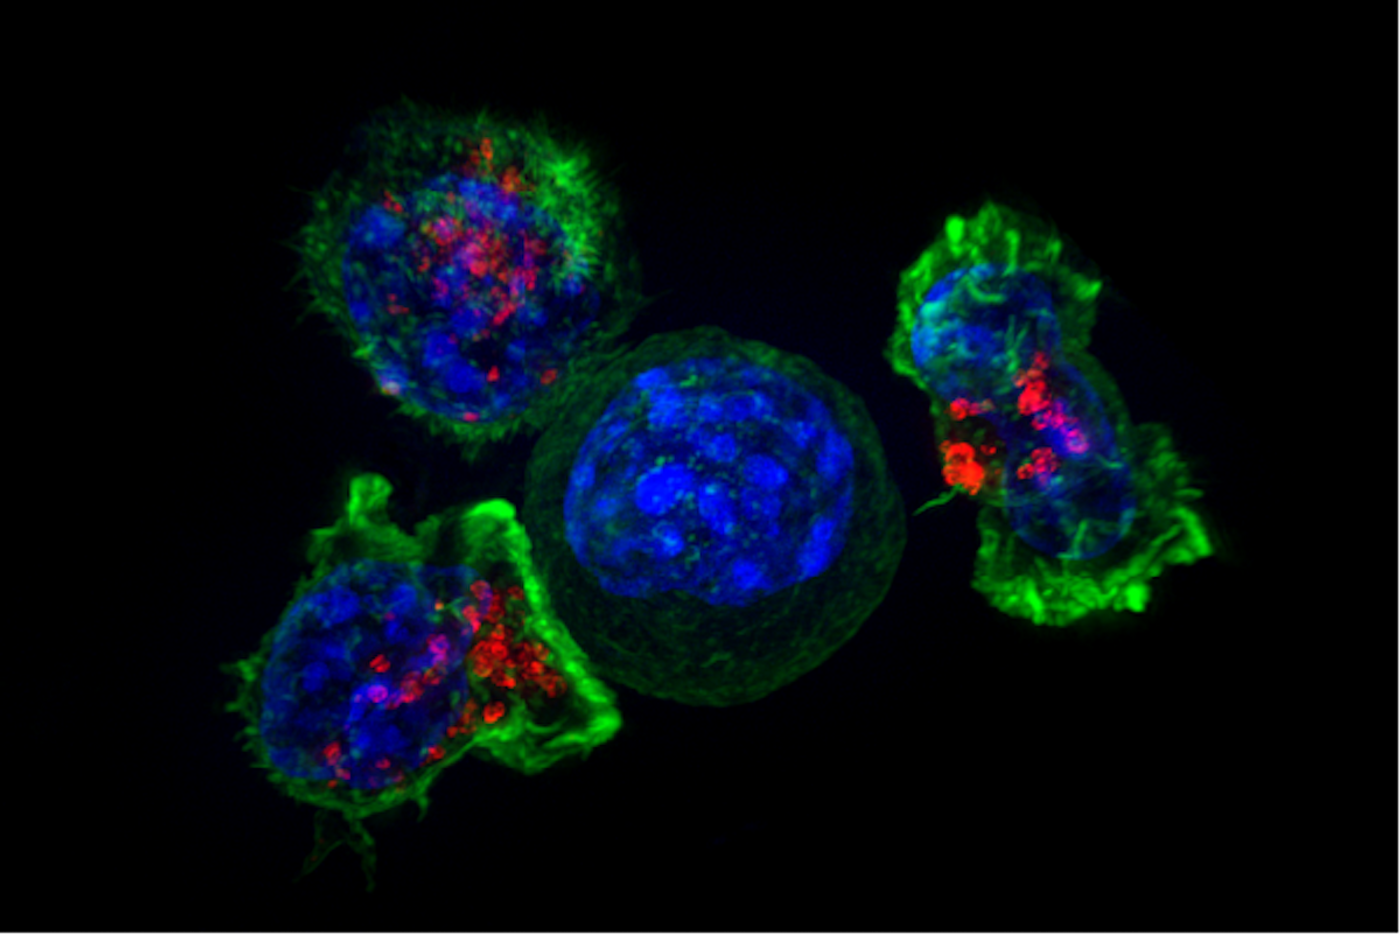 Superresolution image of a group of killer T cells (green and red) surrounding a cancer cell (blue, center). / Credit: Alex Ritter, Jennifer Lippincott Schwartz, and Gillian Griffiths, National Institutes of Health